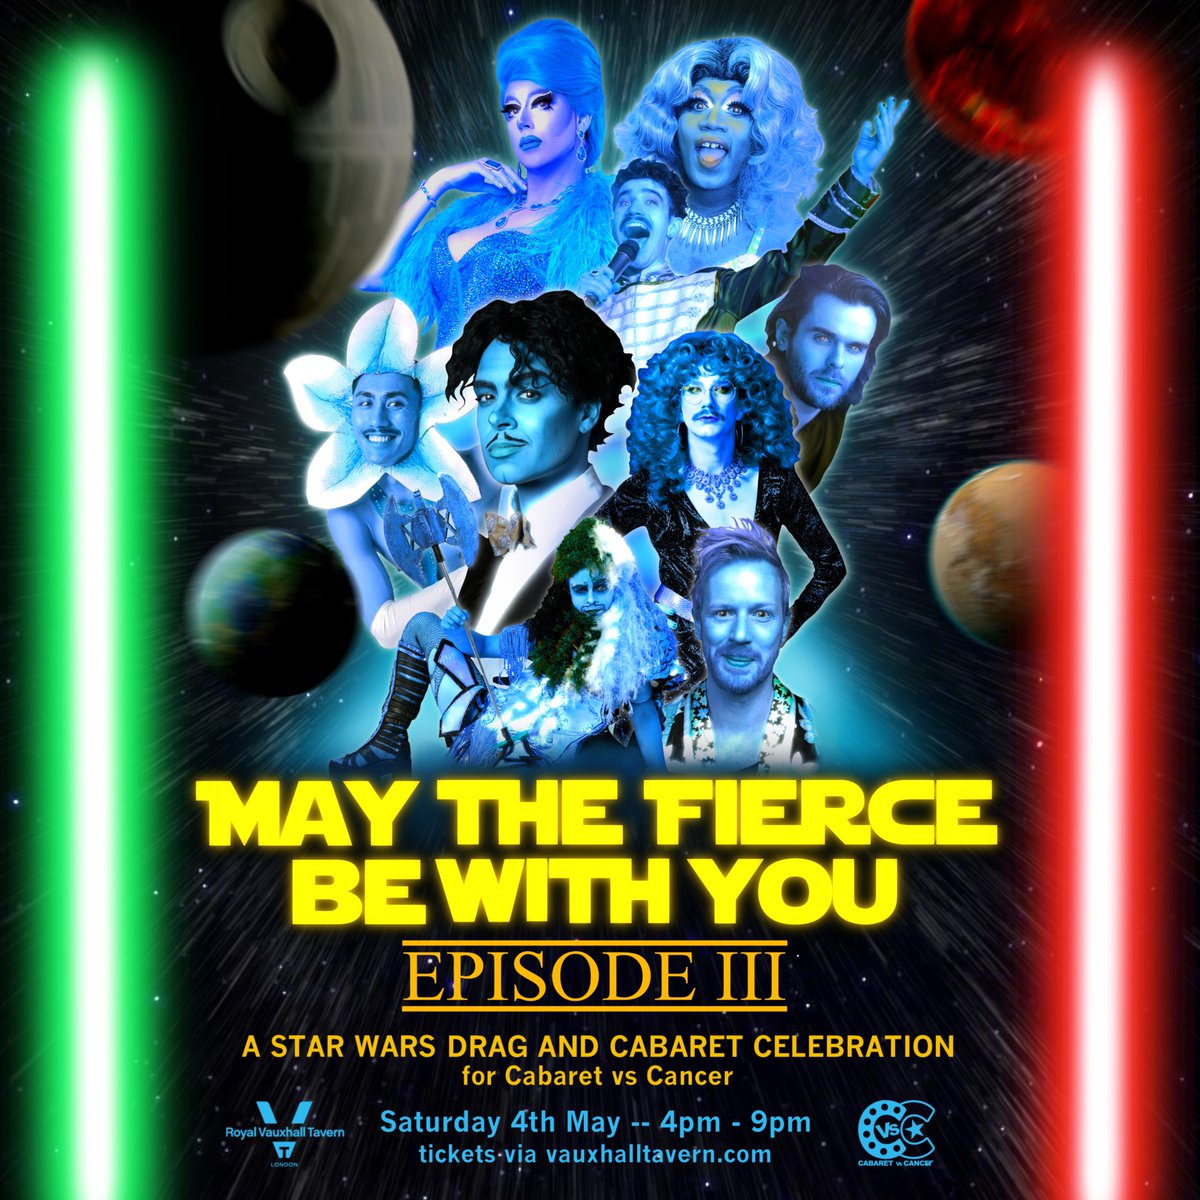 ✨MAY THE FIERCE BE WITH YOU✨ A drag & cabaret celebration of Star Wars - raising funds at @thervt for @cabaretVScancer The laughter will be strong with this one! 📅 Sat 4 May 🕓 4 - 9pm 🎫 £12 - bit.ly/3UmjIZg #starwars #may4thbewithyou #lgbt #charity #london